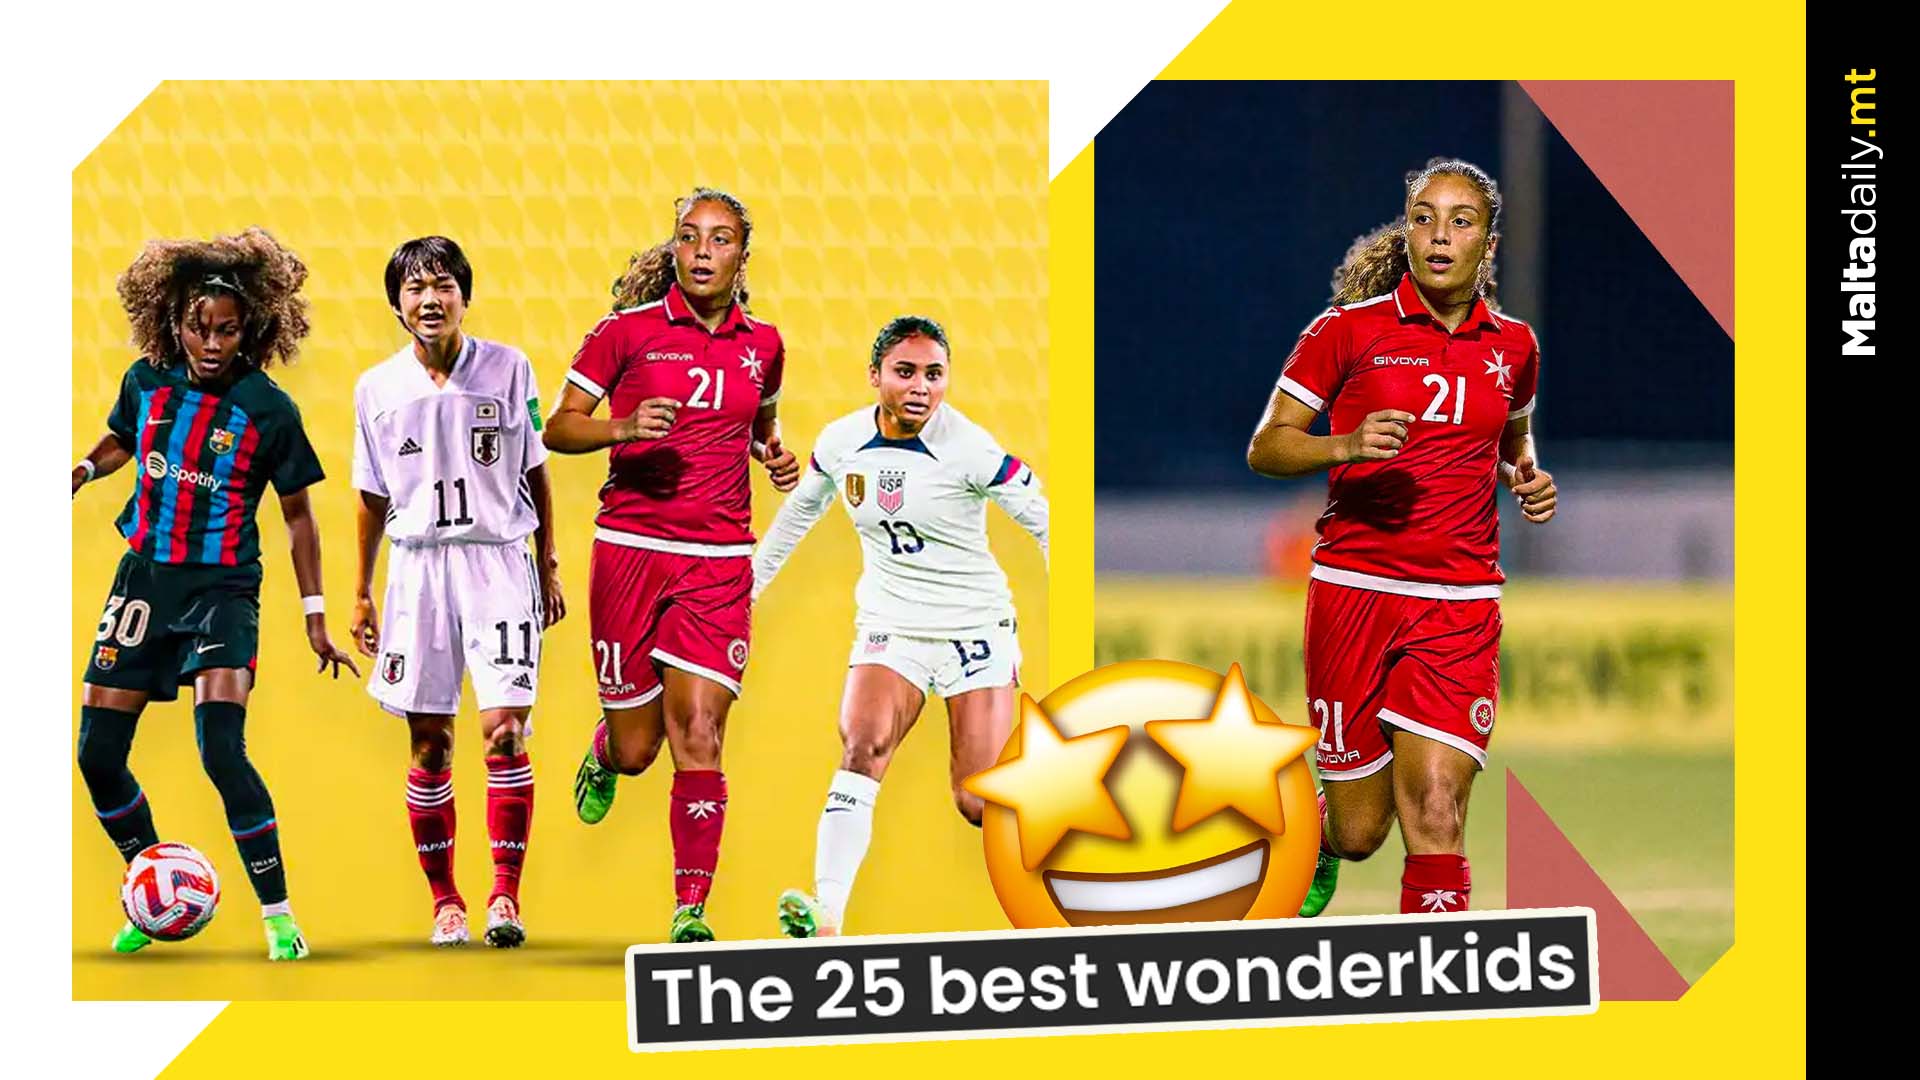 Haley Bugeja makes it onto 25 best wonderkids list for third year in a row